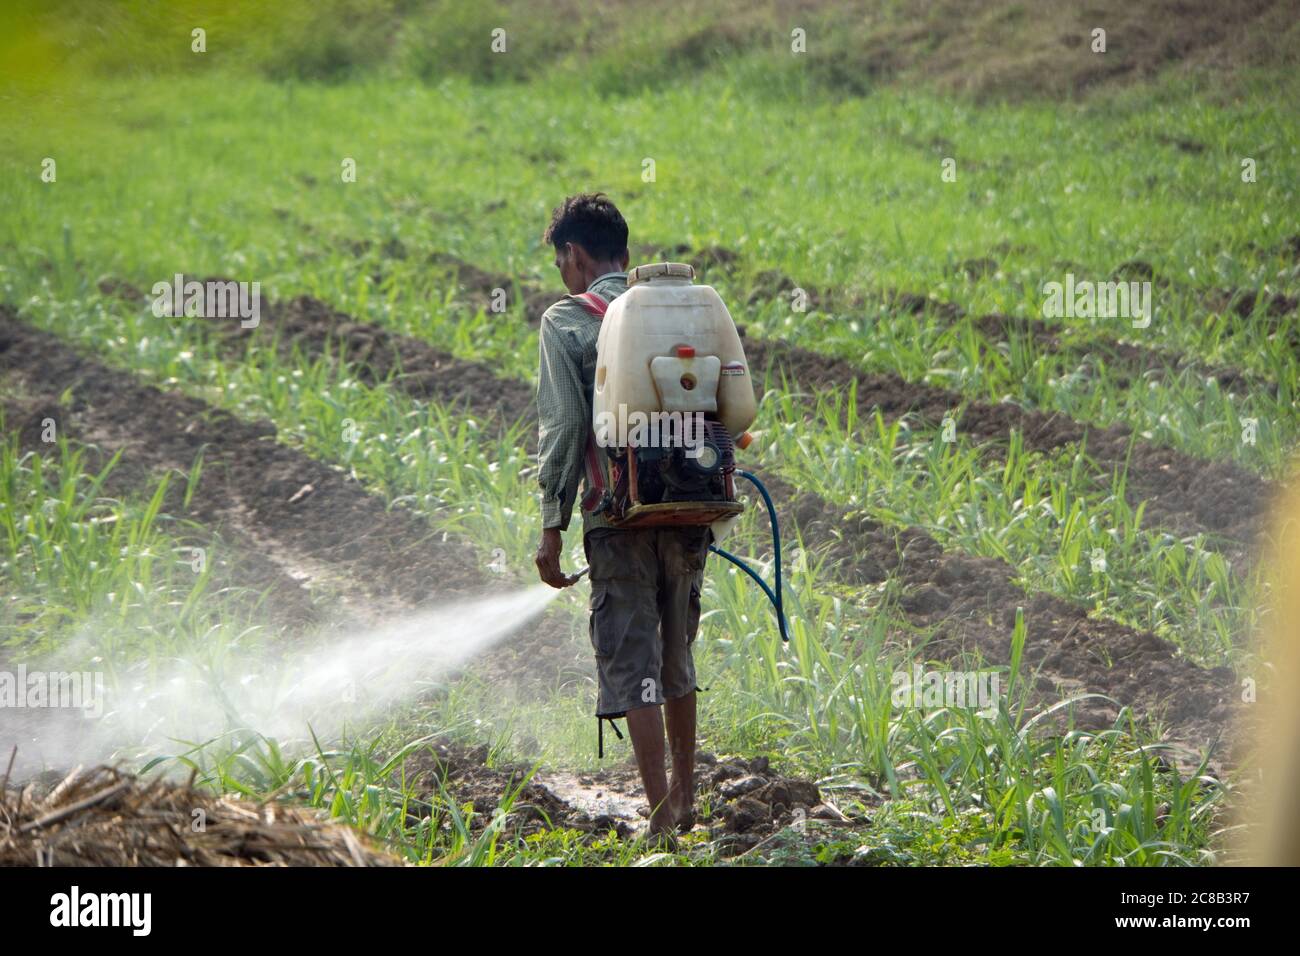 Thai farmer spraying crops and field with herbicide mist in the Thai countryside. Stock Photo